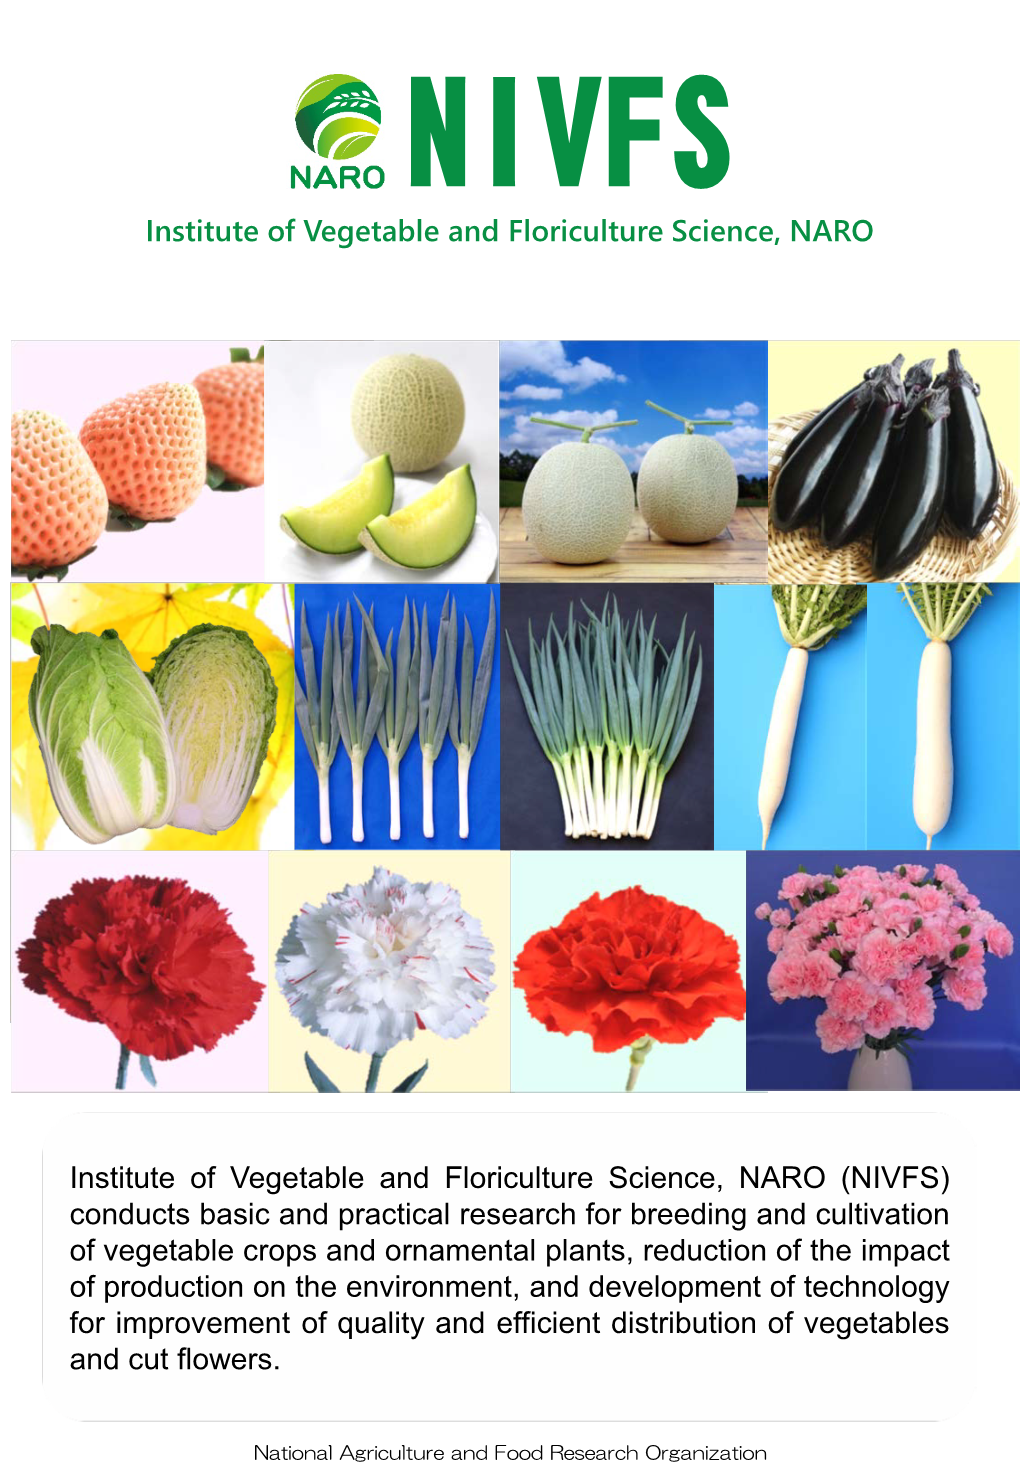 Institute of Vegetable and Floriculture Science, NARO